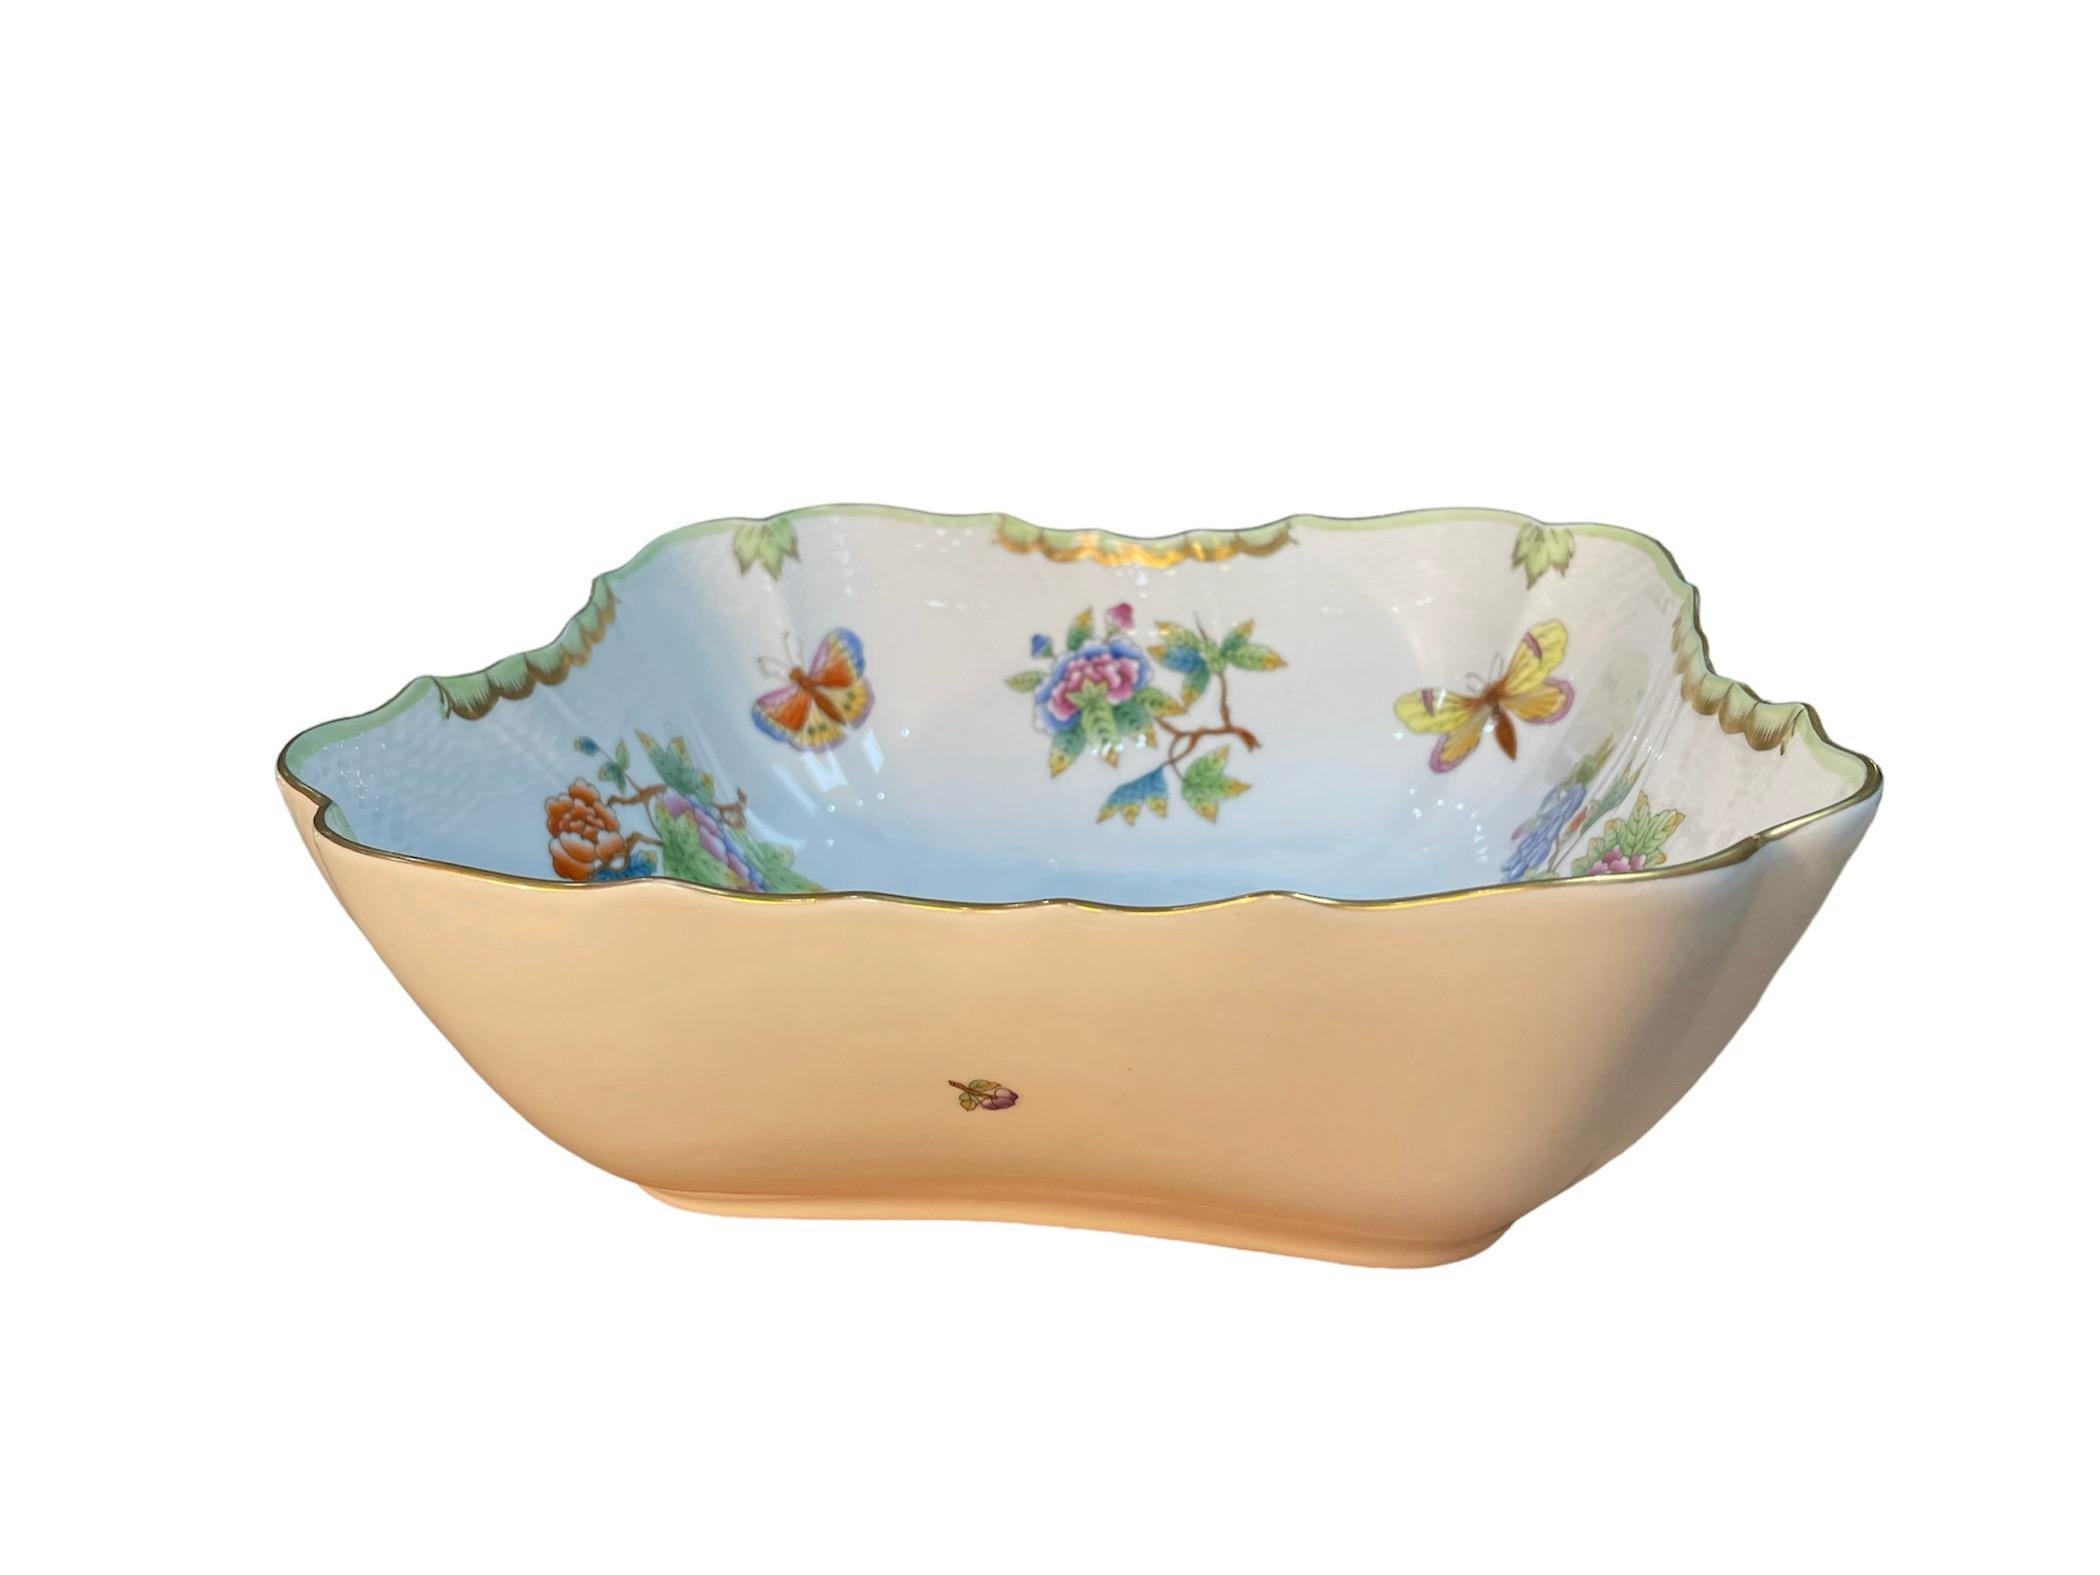 20th Century Herend Porcelain Queen Victoria Pattern Salad Bowl For Sale